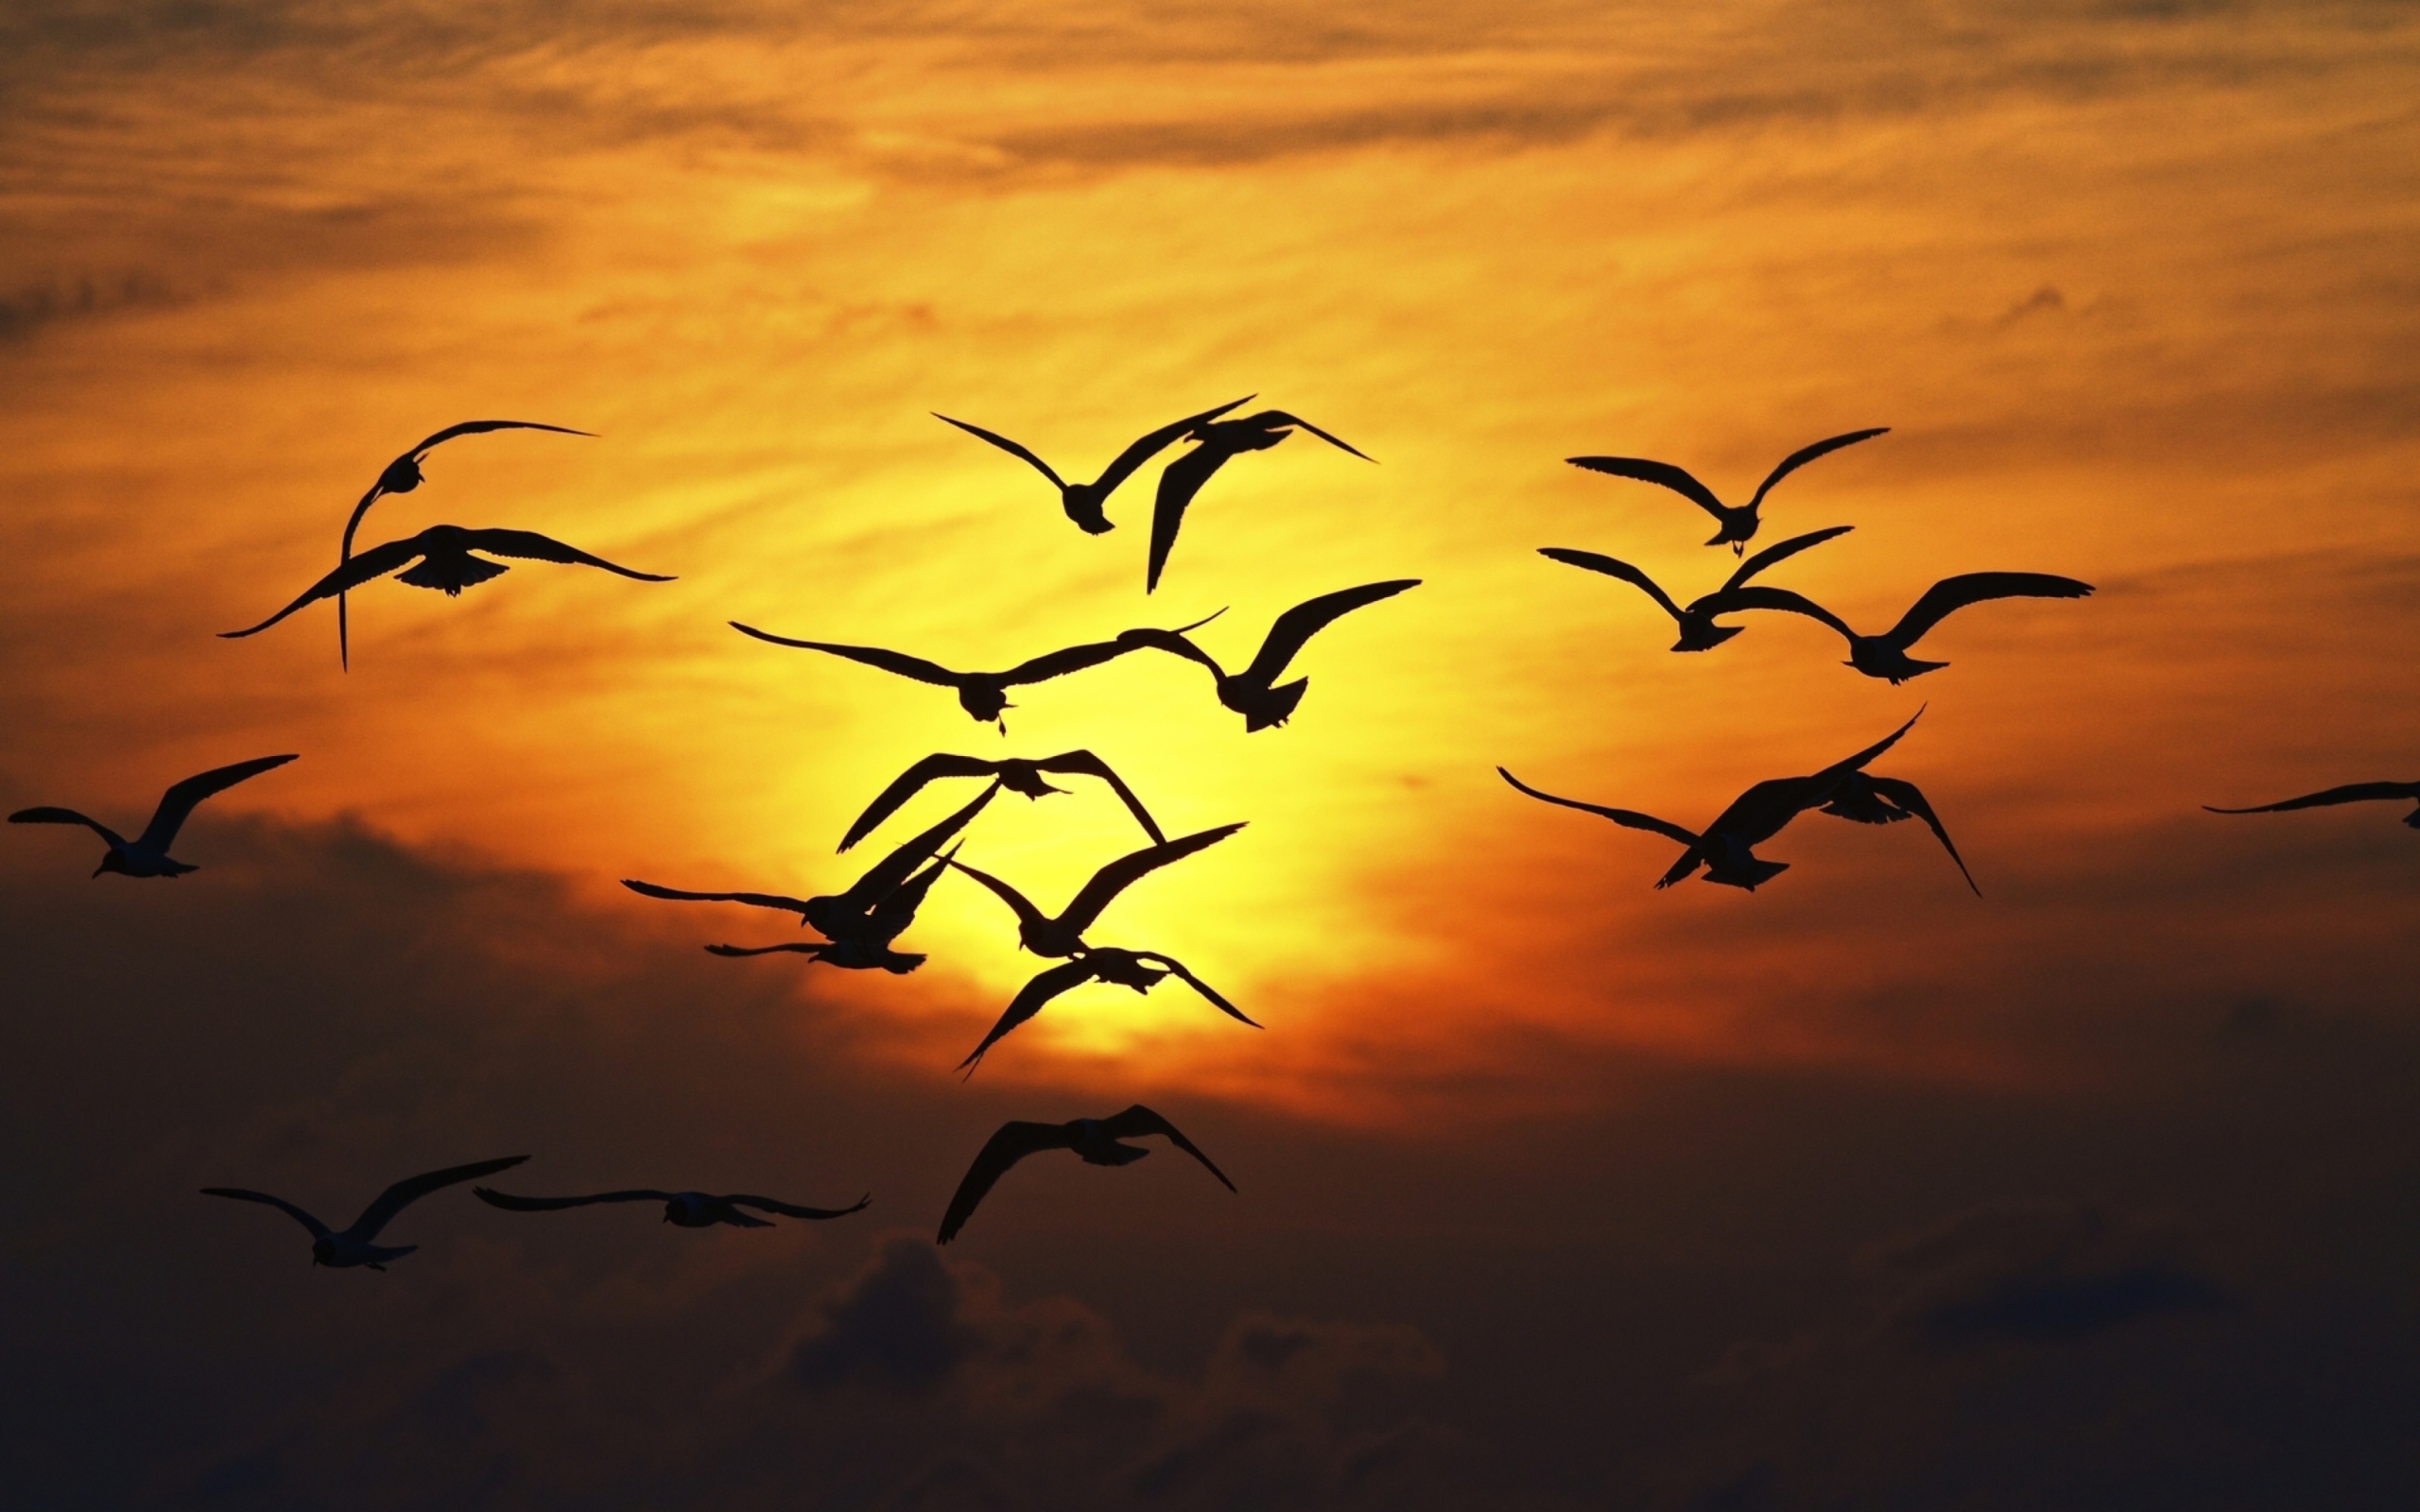 Birds Silhouettes At Sunset wallpaper 2560x1600